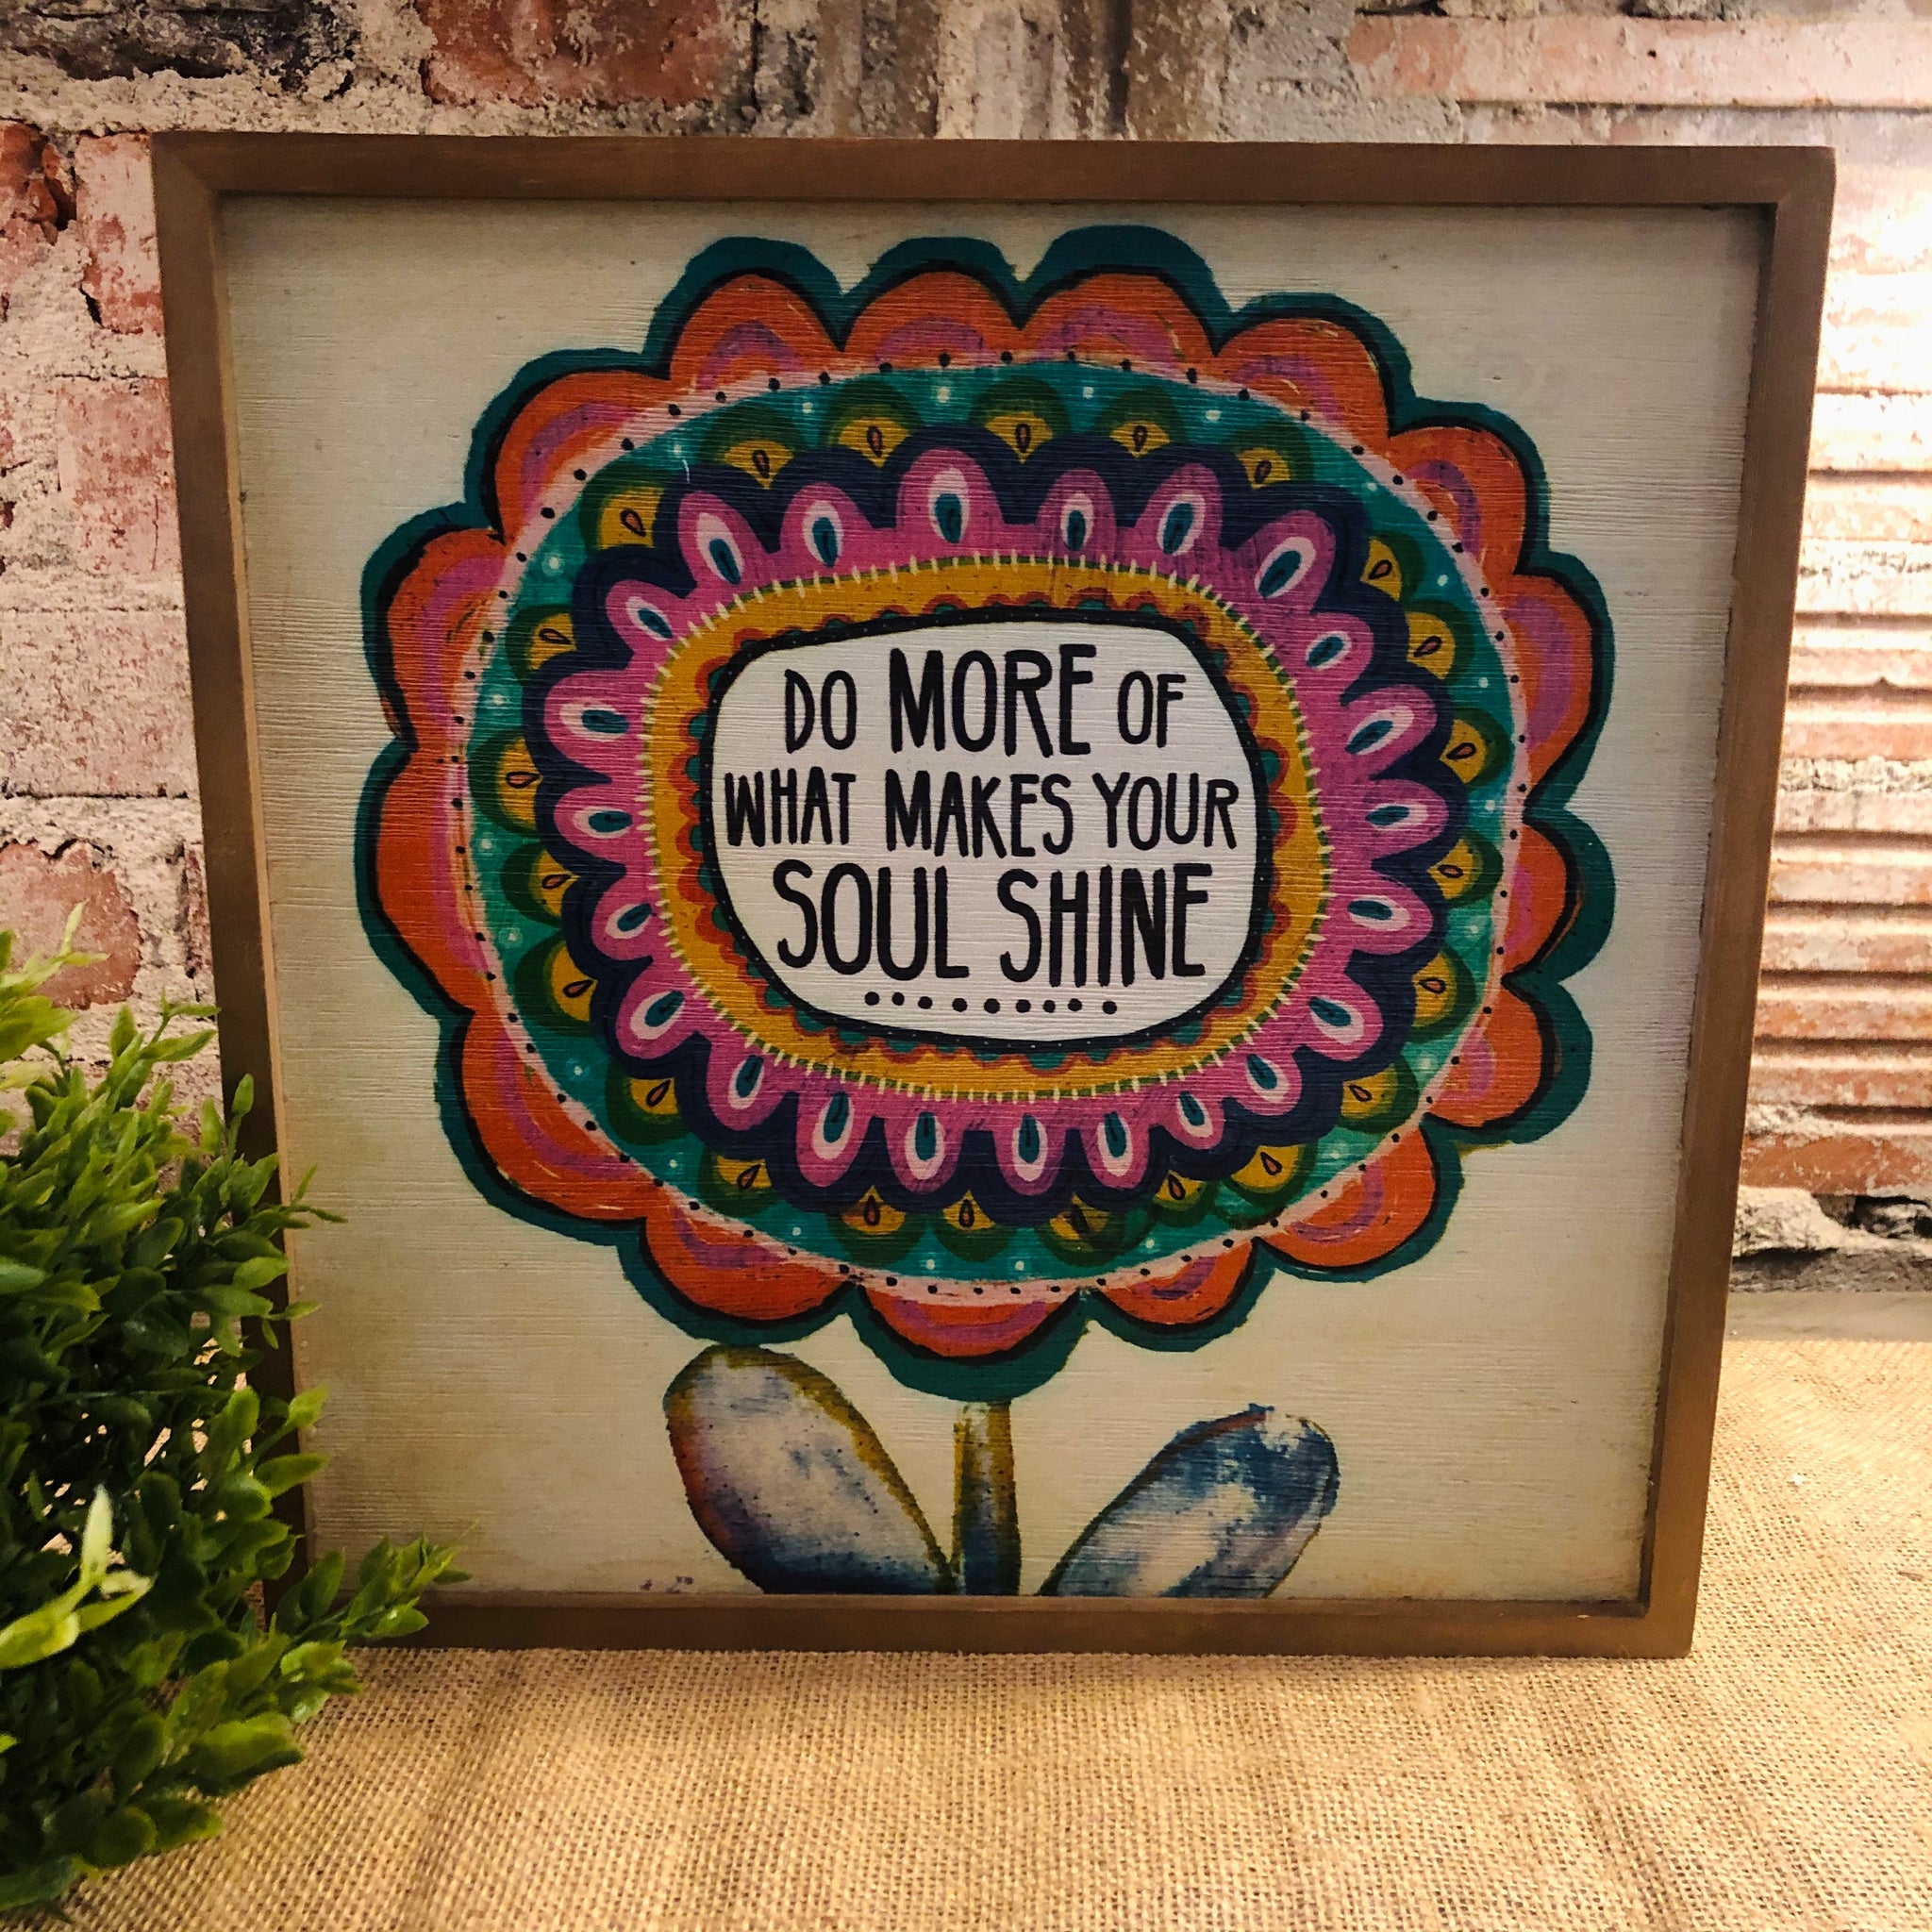 Do More of What Makes Your Soul Shine